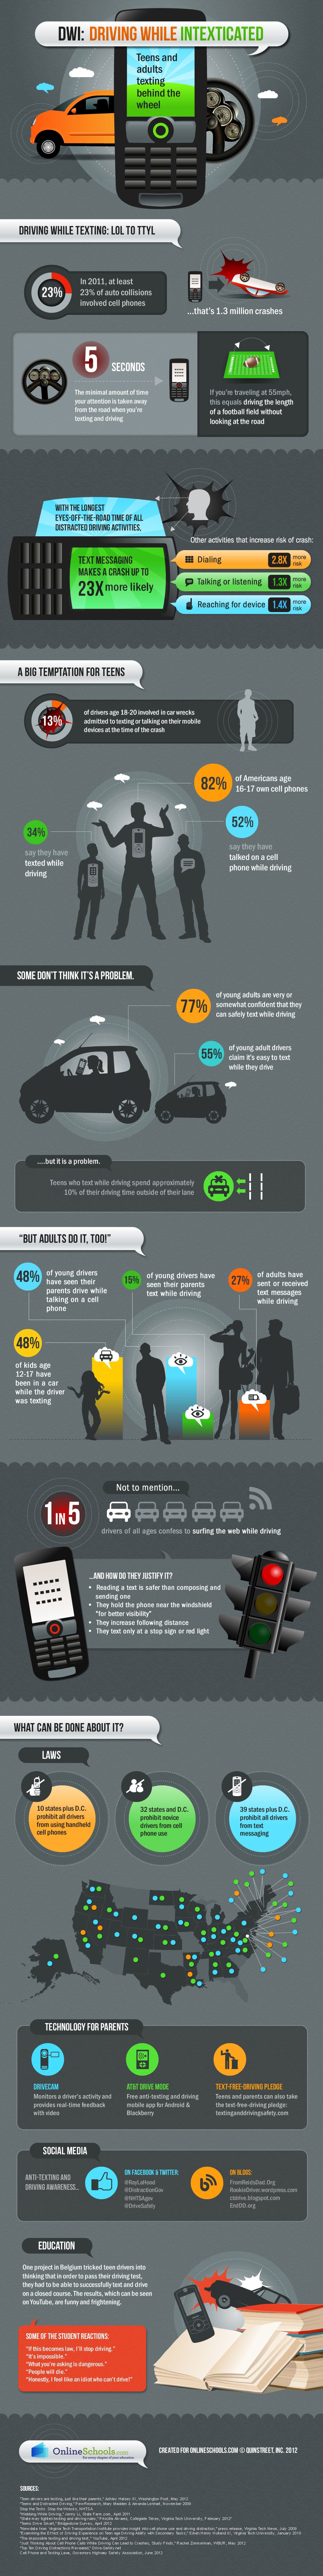 A sobering reminder of the dangers of texting and driving [Infographic]